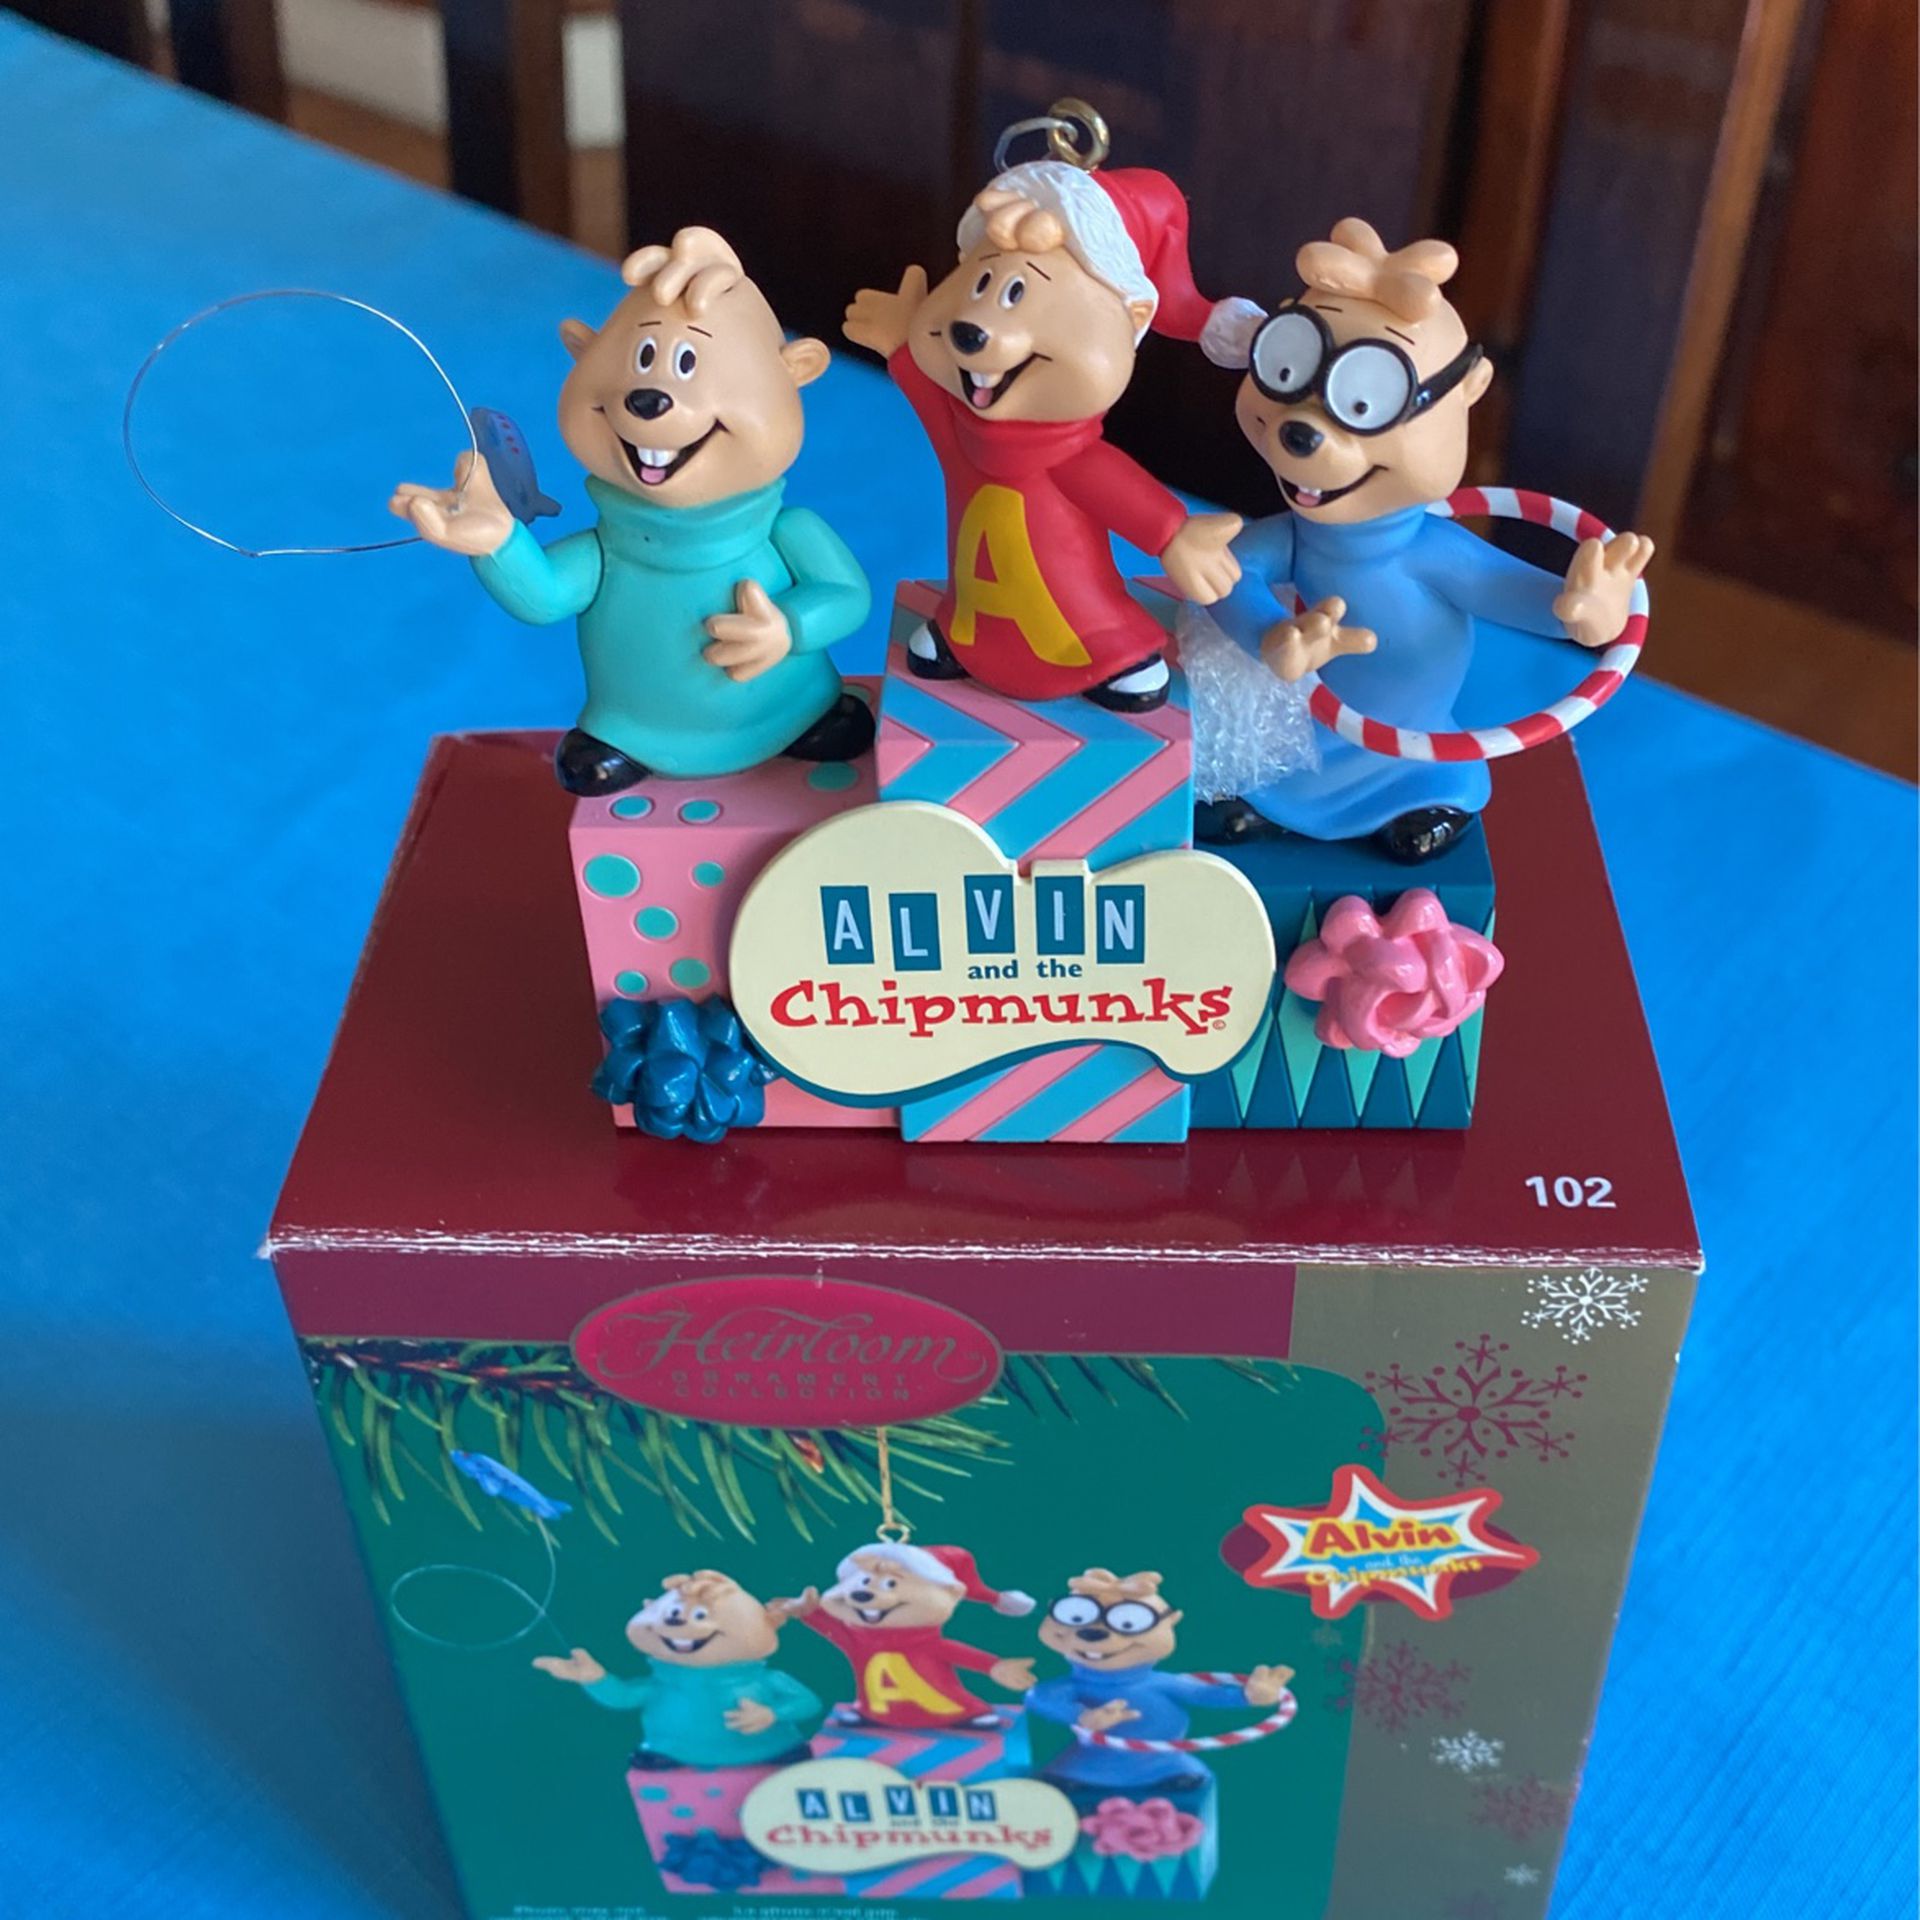 Heirloom ornament collection Alvin and the chipmunks Christmas, don’t be late musical in the original box